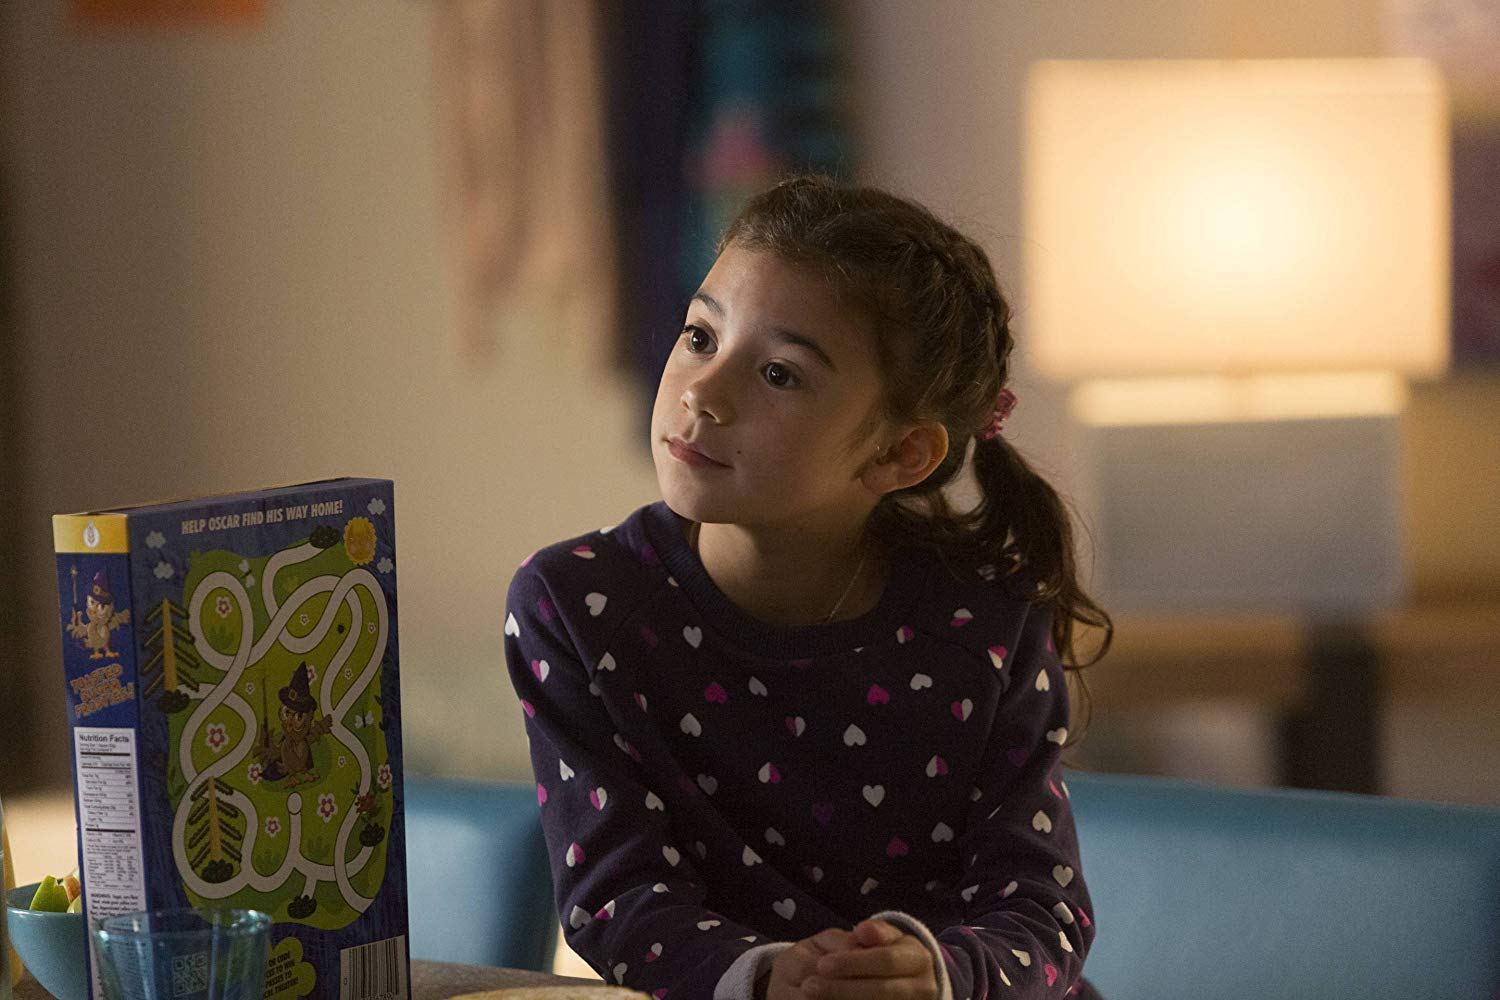 Trixie, the kiddo in the Lucifer series.